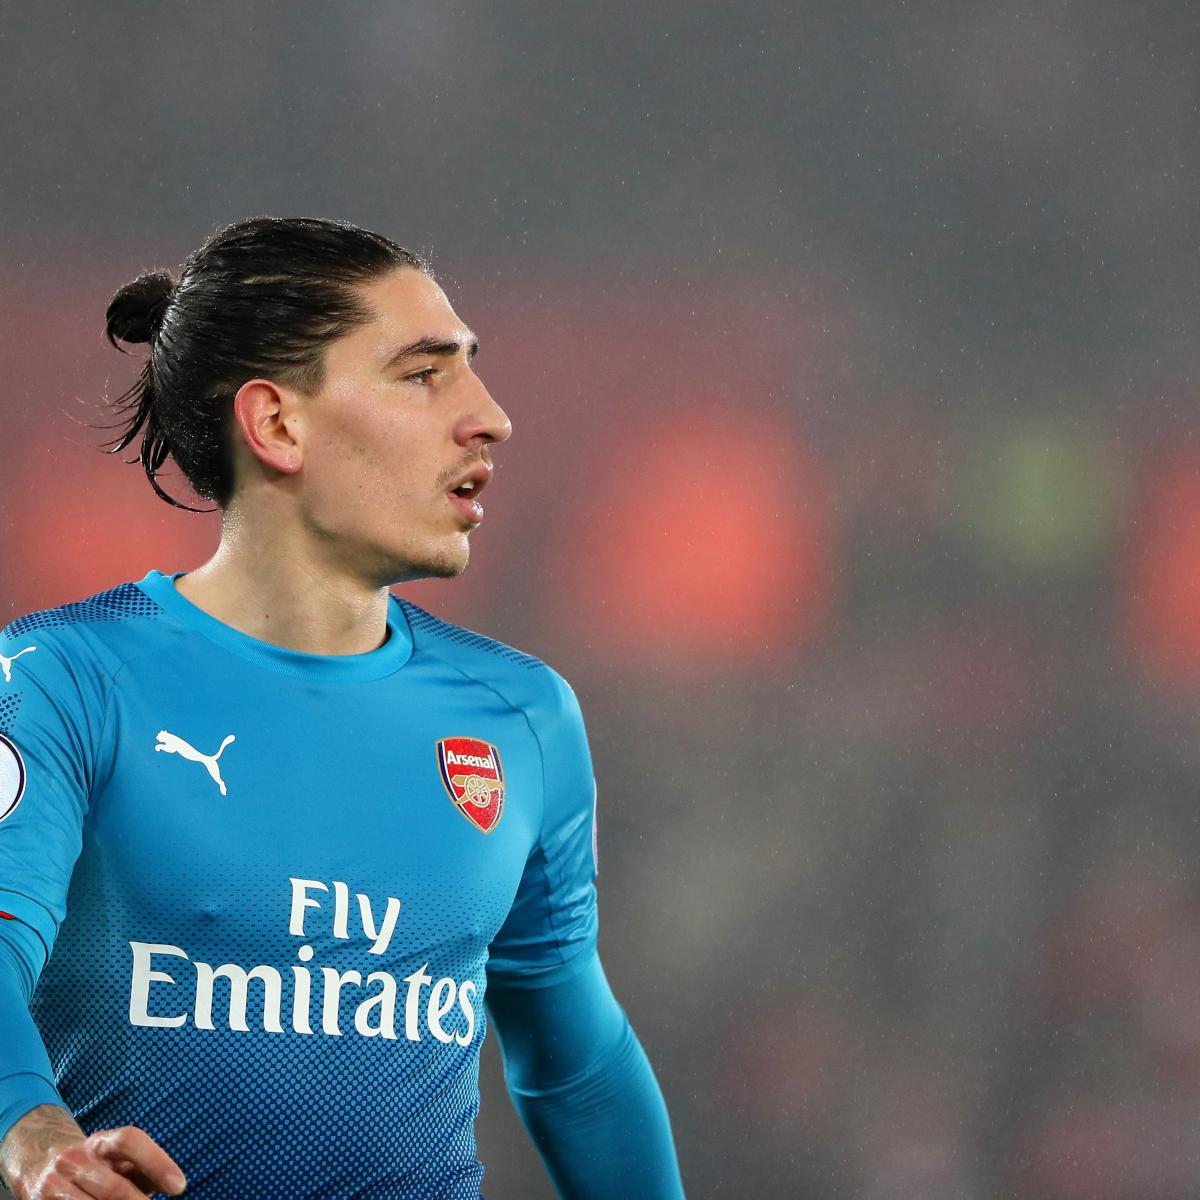 We Should Be Spreading Awareness About the Things We Care About”: Hector  Bellerin Is on a